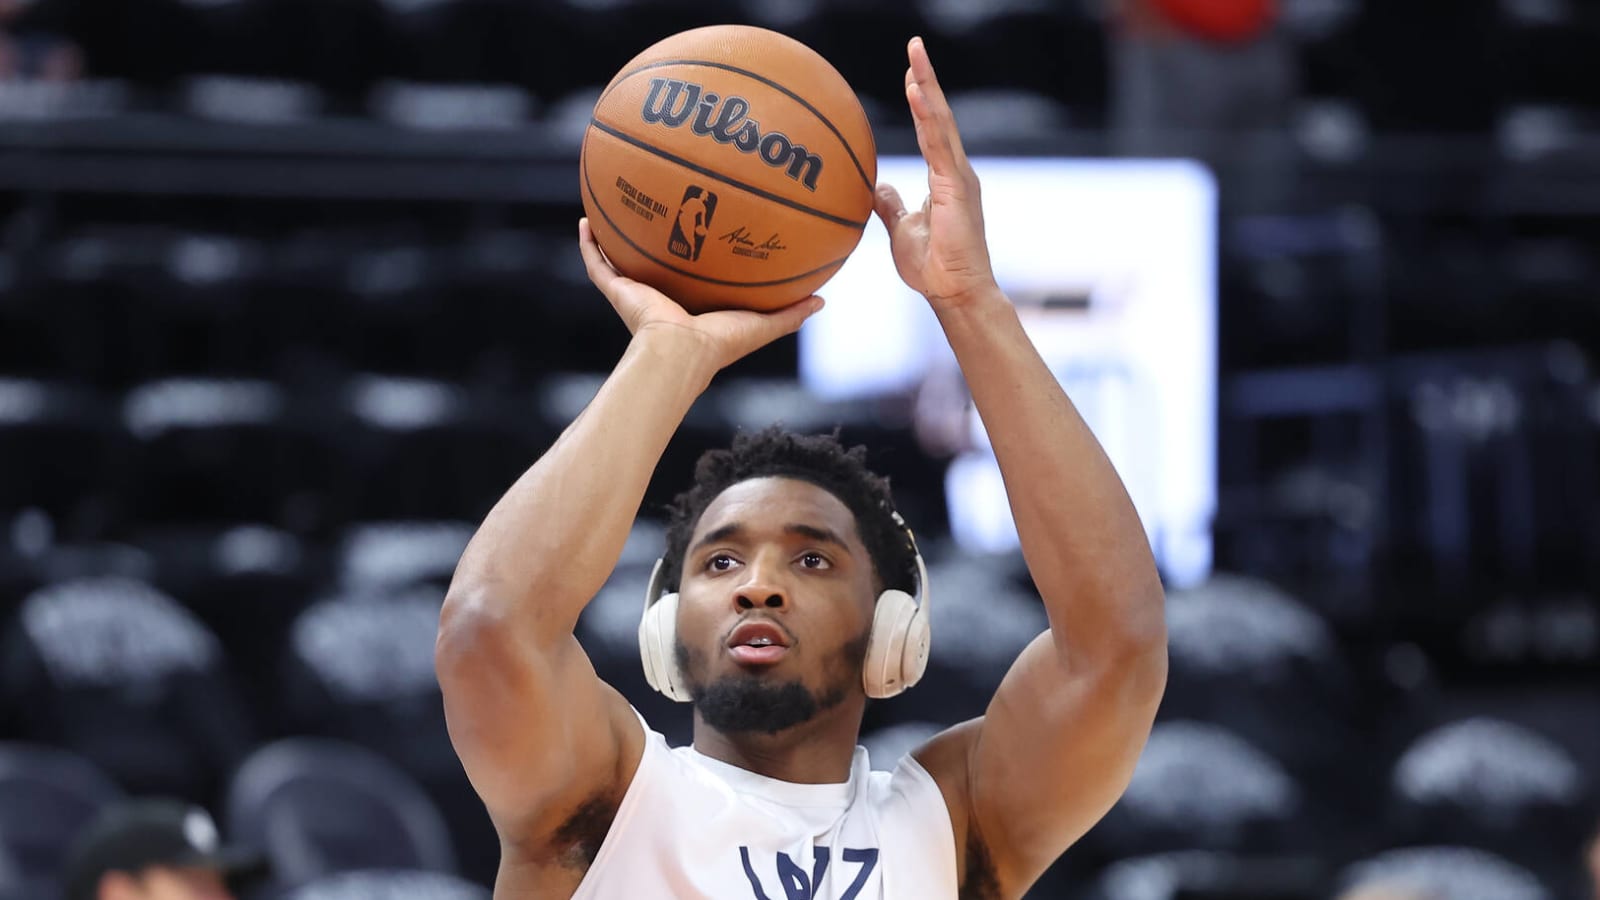 Pitino: Donovan Mitchell 'would love to be a New York Knick'